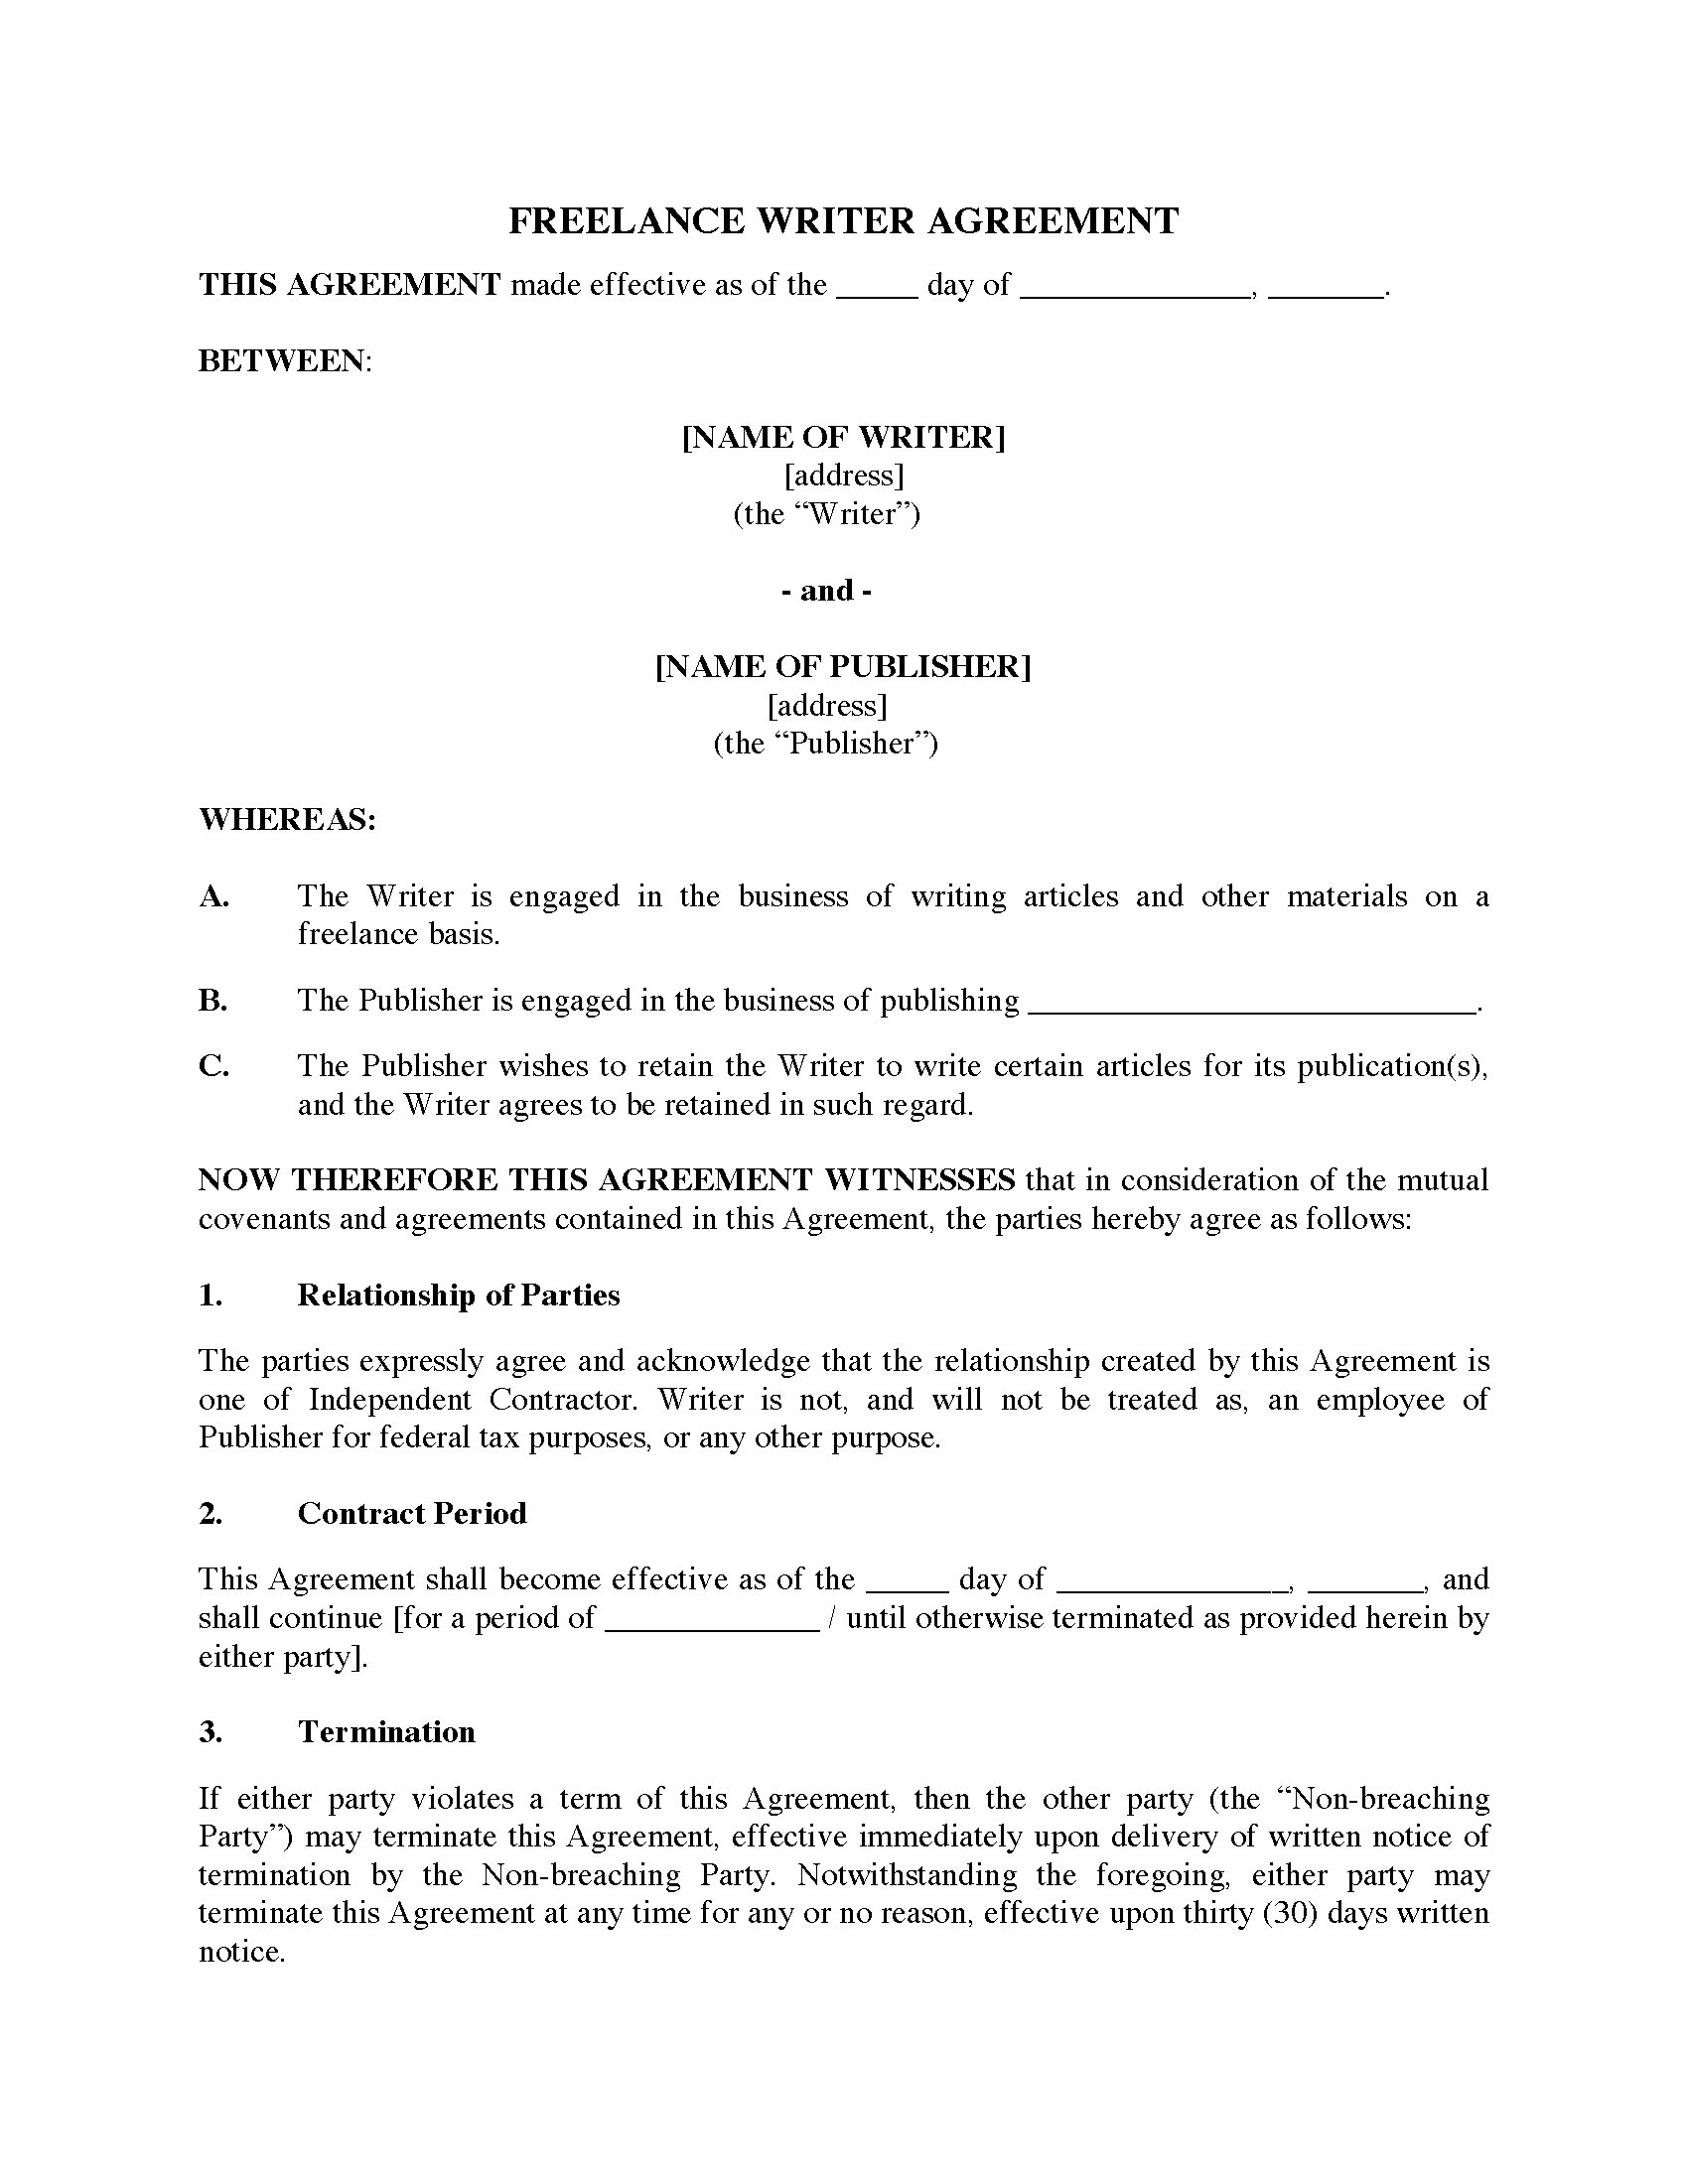 Freelance Writer Agreement  Legal Forms and Business Templates Intended For freelance writer agreement template